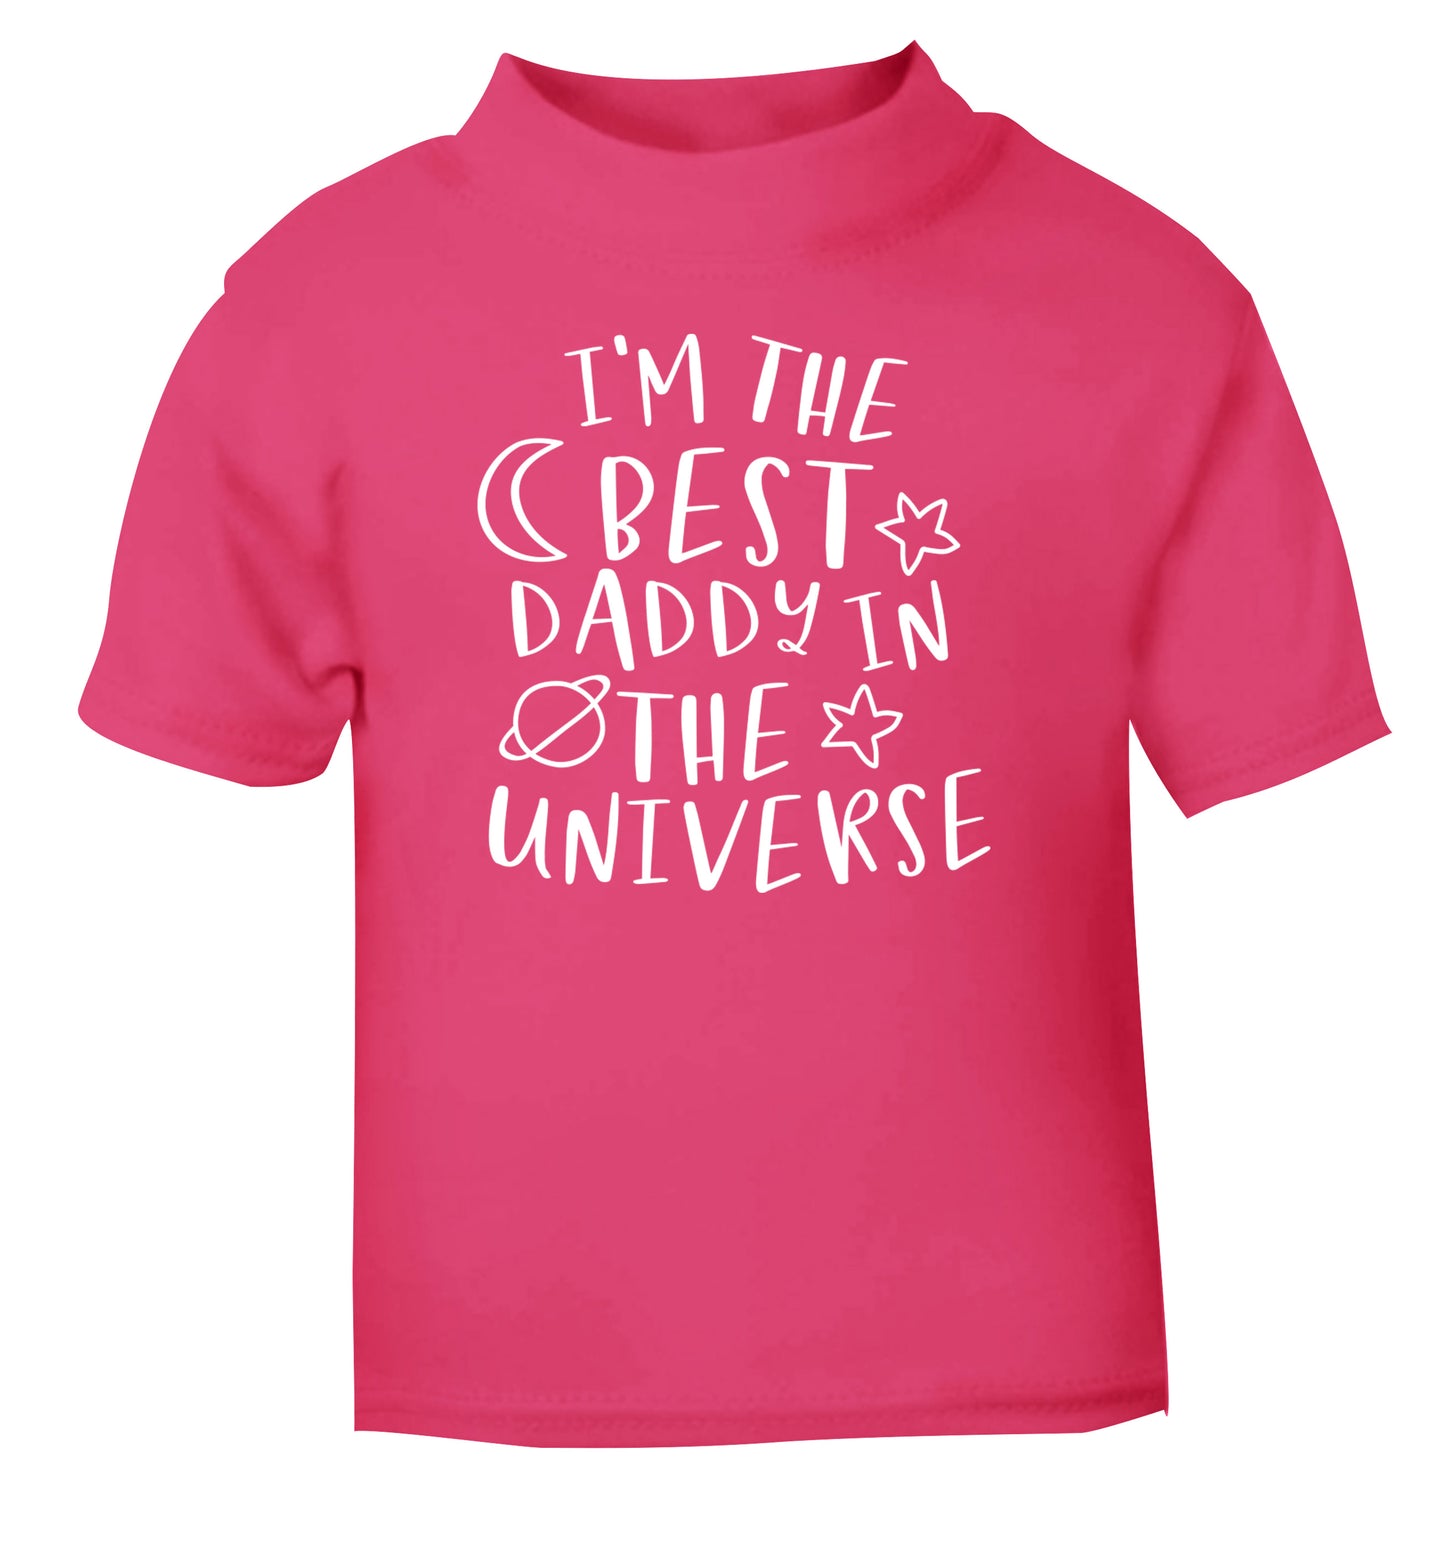 I'm the best daddy in the universe pink Baby Toddler Tshirt 2 Years